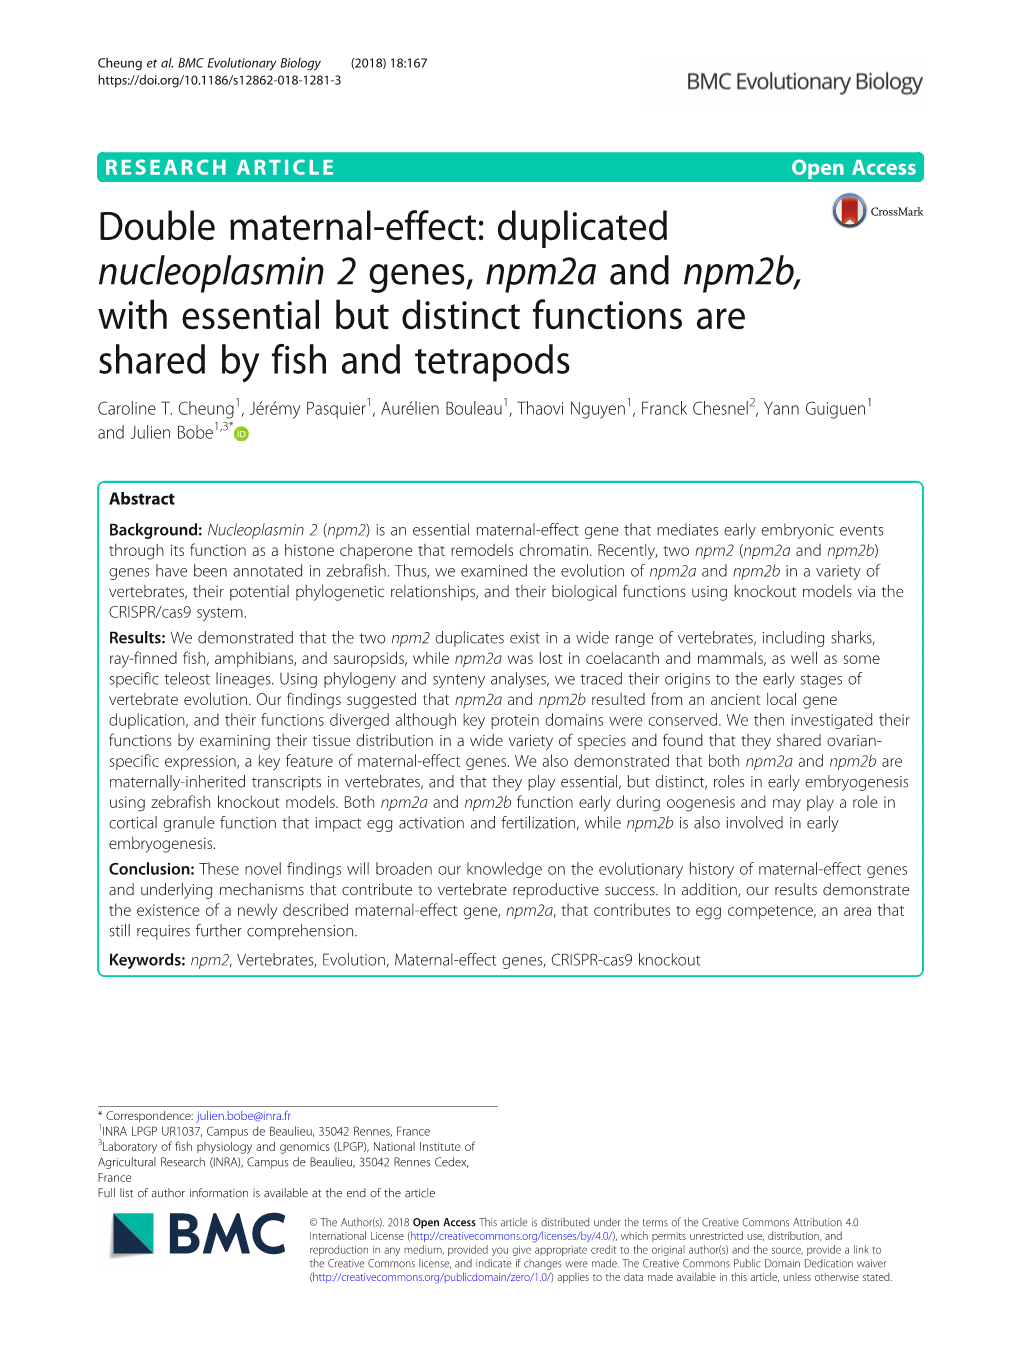 Double Maternal-Effect: Duplicated Nucleoplasmin 2 Genes, Npm2a and Npm2b, with Essential but Distinct Functions Are Shared by Fish and Tetrapods Caroline T